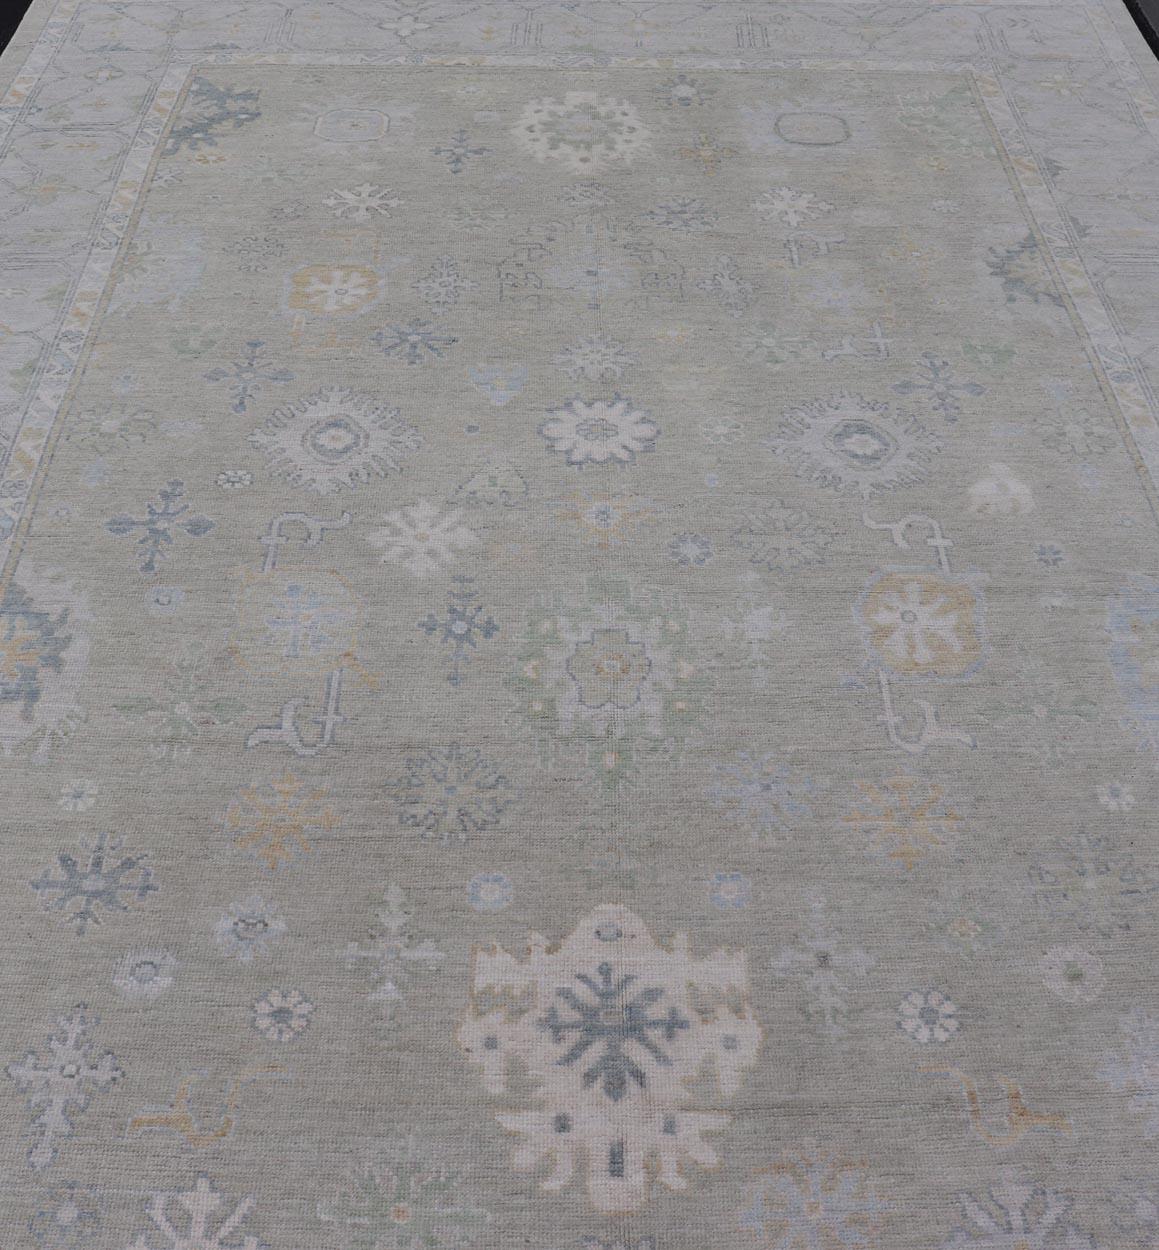 Hand-Knotted Modern Neutral Oushak Rug in Light Gray, Light Blue, Green. Keivan Woven Arts; rug AWR-16020 / Country of Origin: Afghanistan Type: Oushak Design: All-Over, Floral
Measures: 10.3 x 14.3 
This rustic piece holds charm within a powder